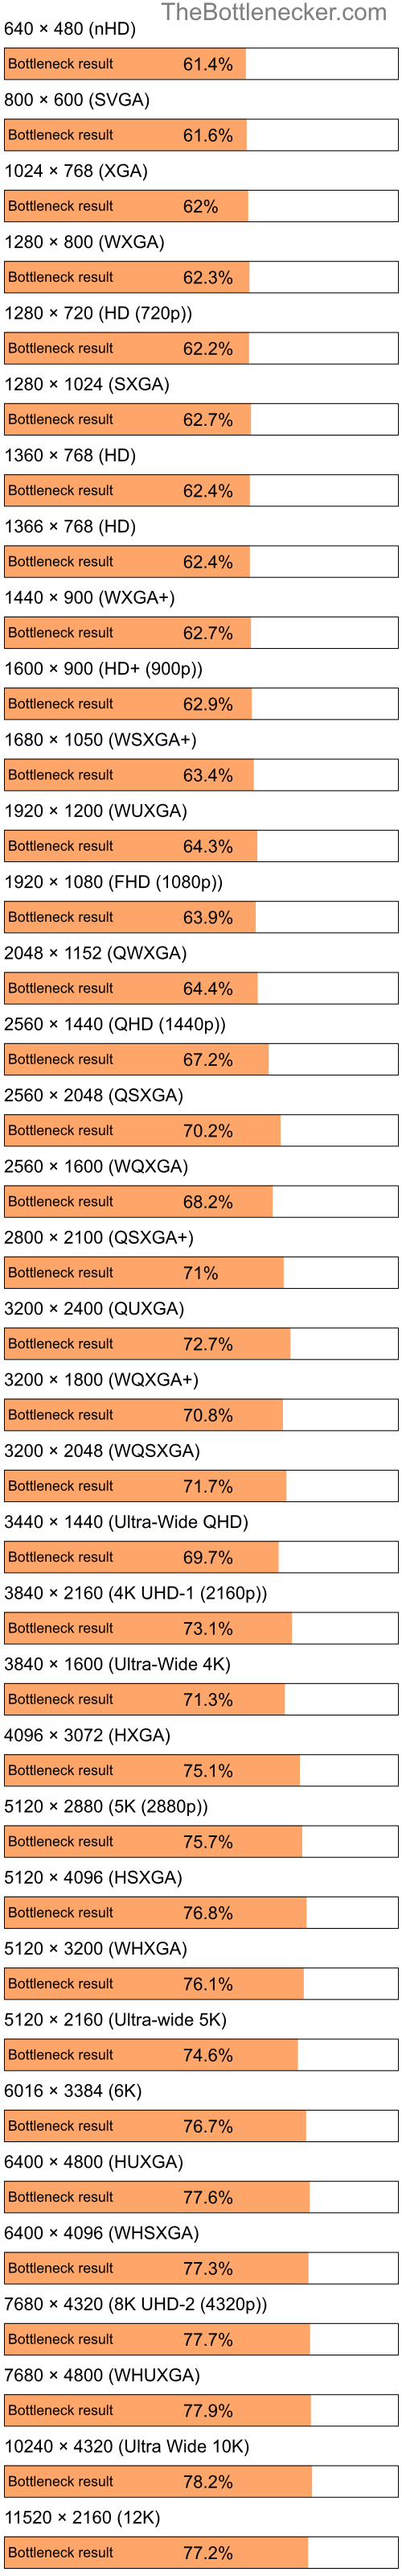 Bottleneck results by resolution for Intel Pentium 4 and AMD Radeon X800 PRO in Processor Intense Tasks